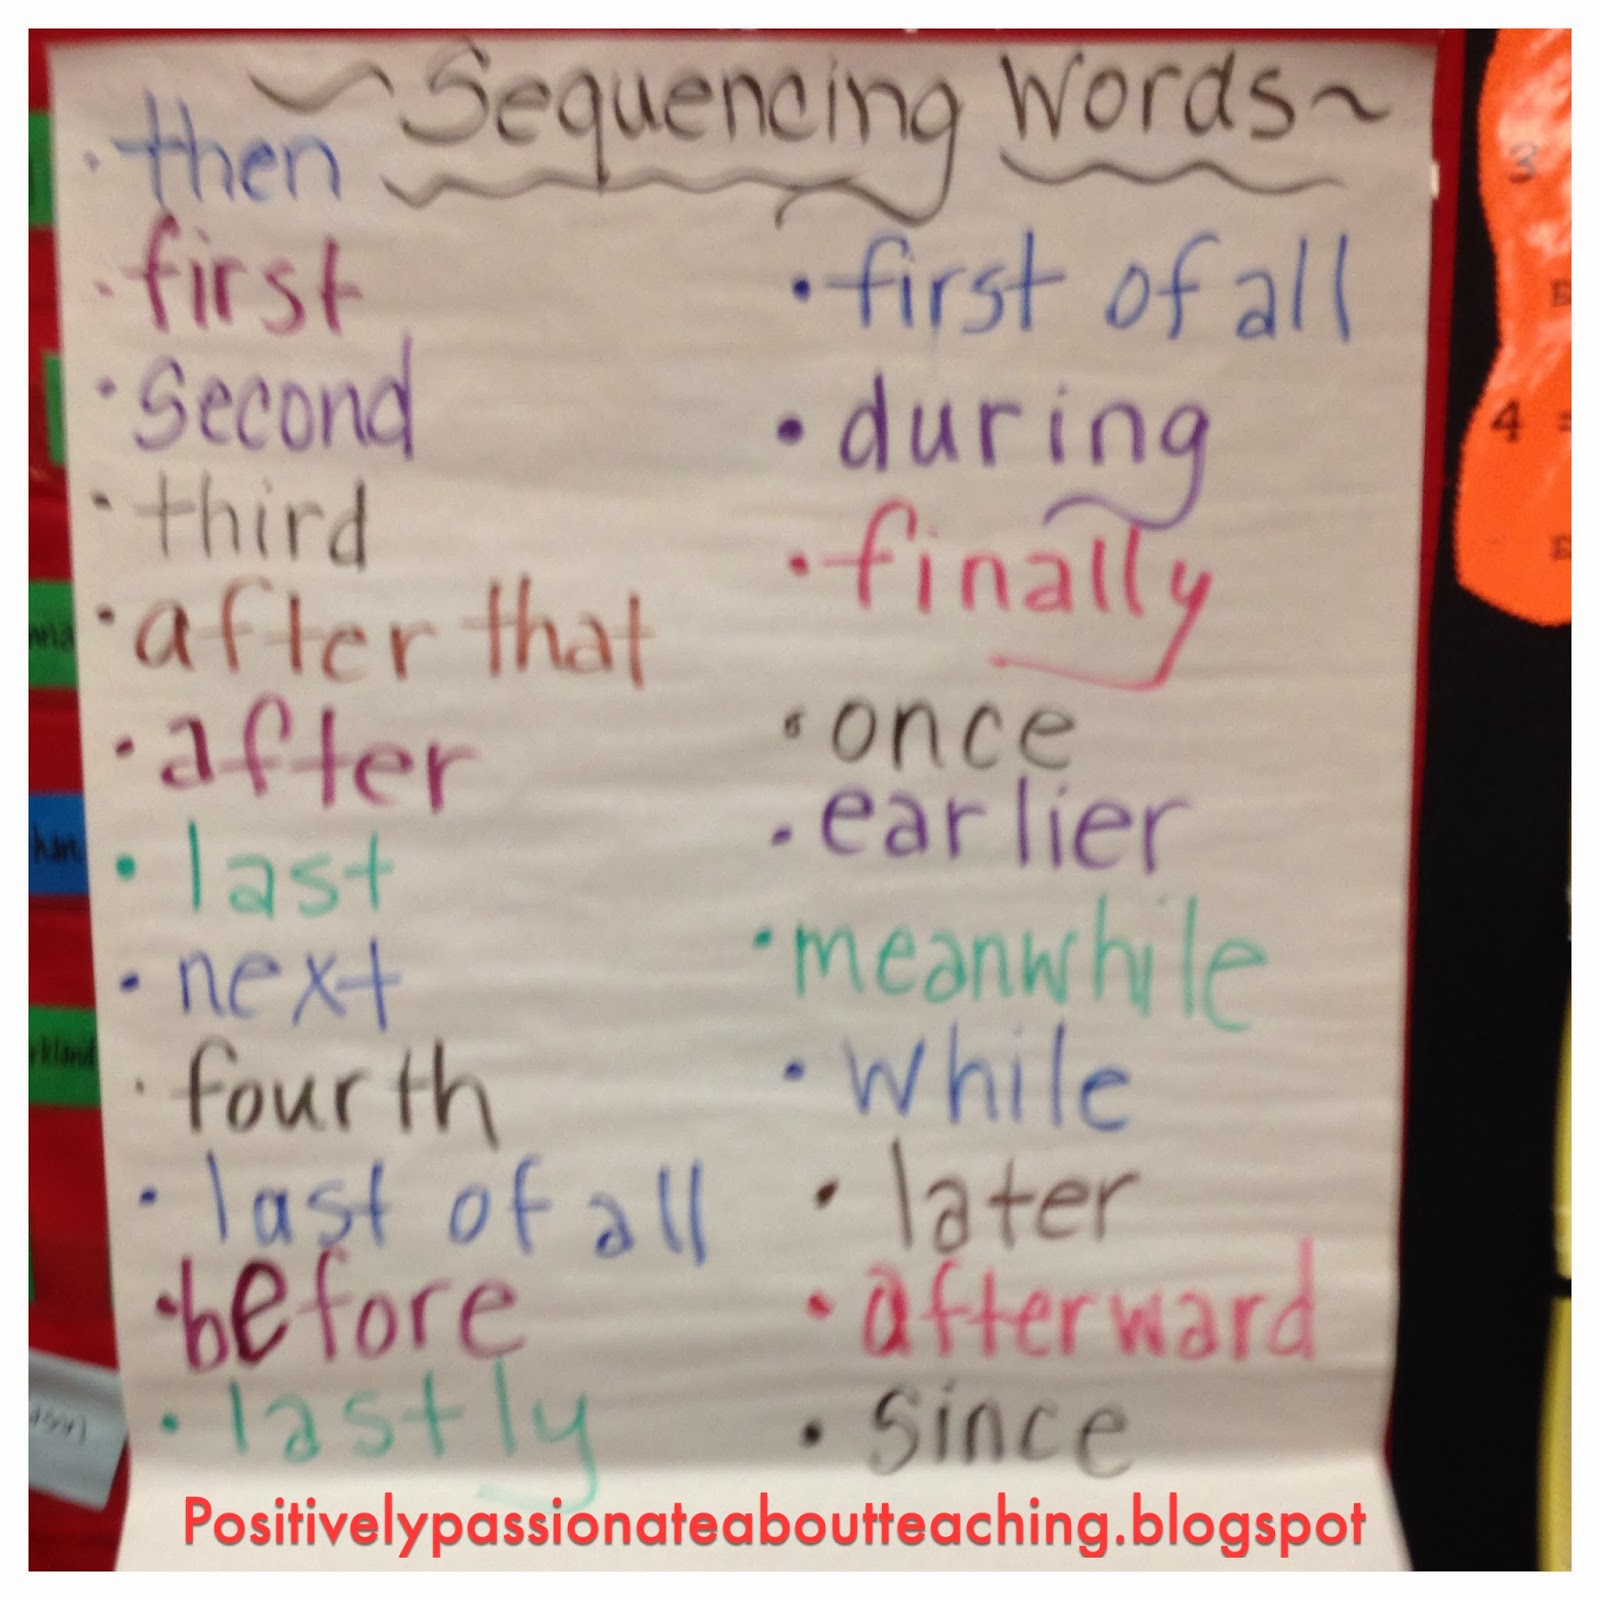 Sequence Of Events Anchor Chart